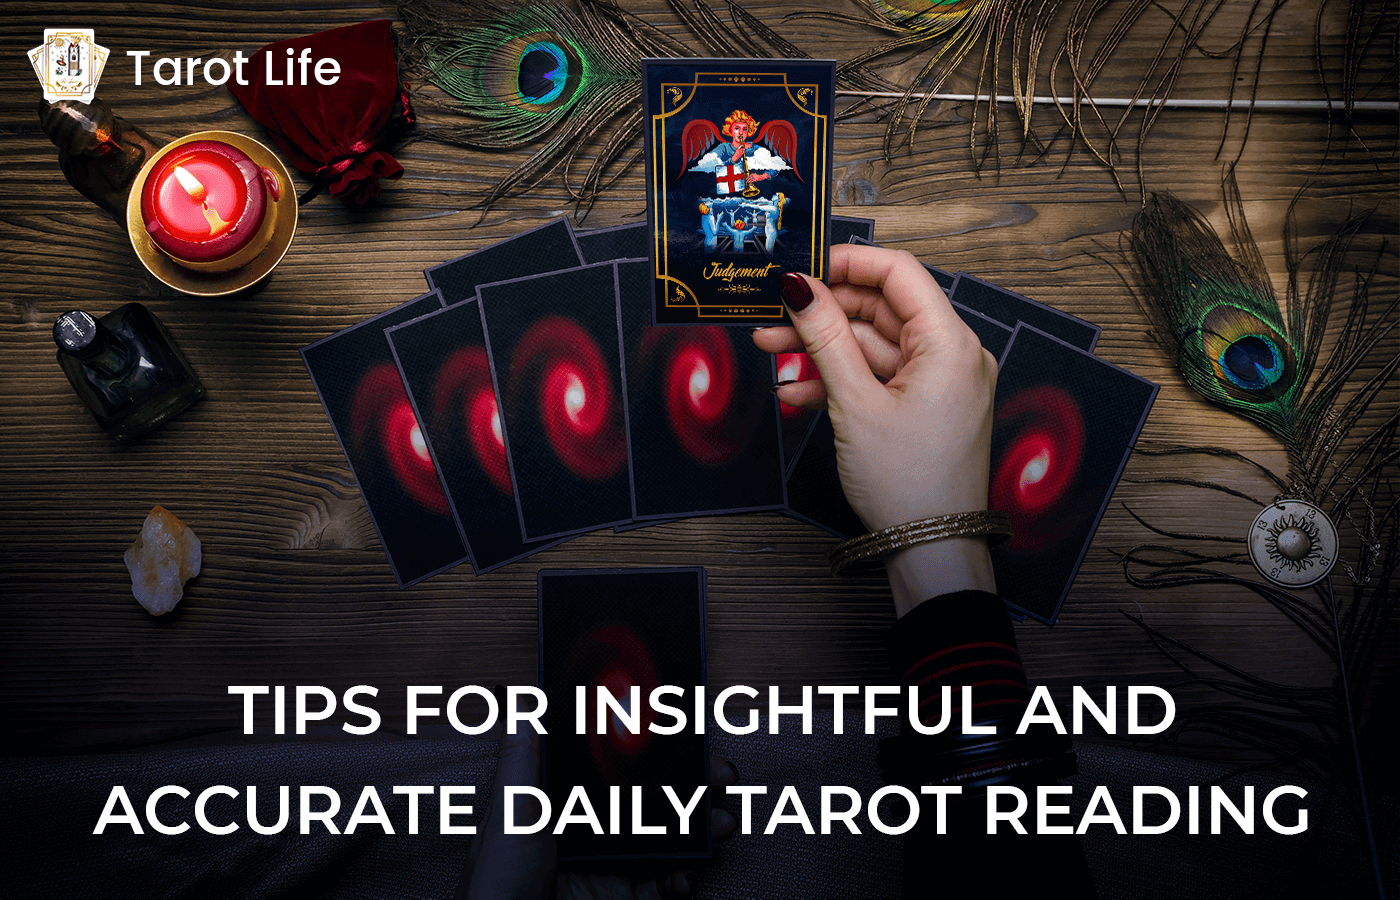 10 tips about daily tarot reading you need to know